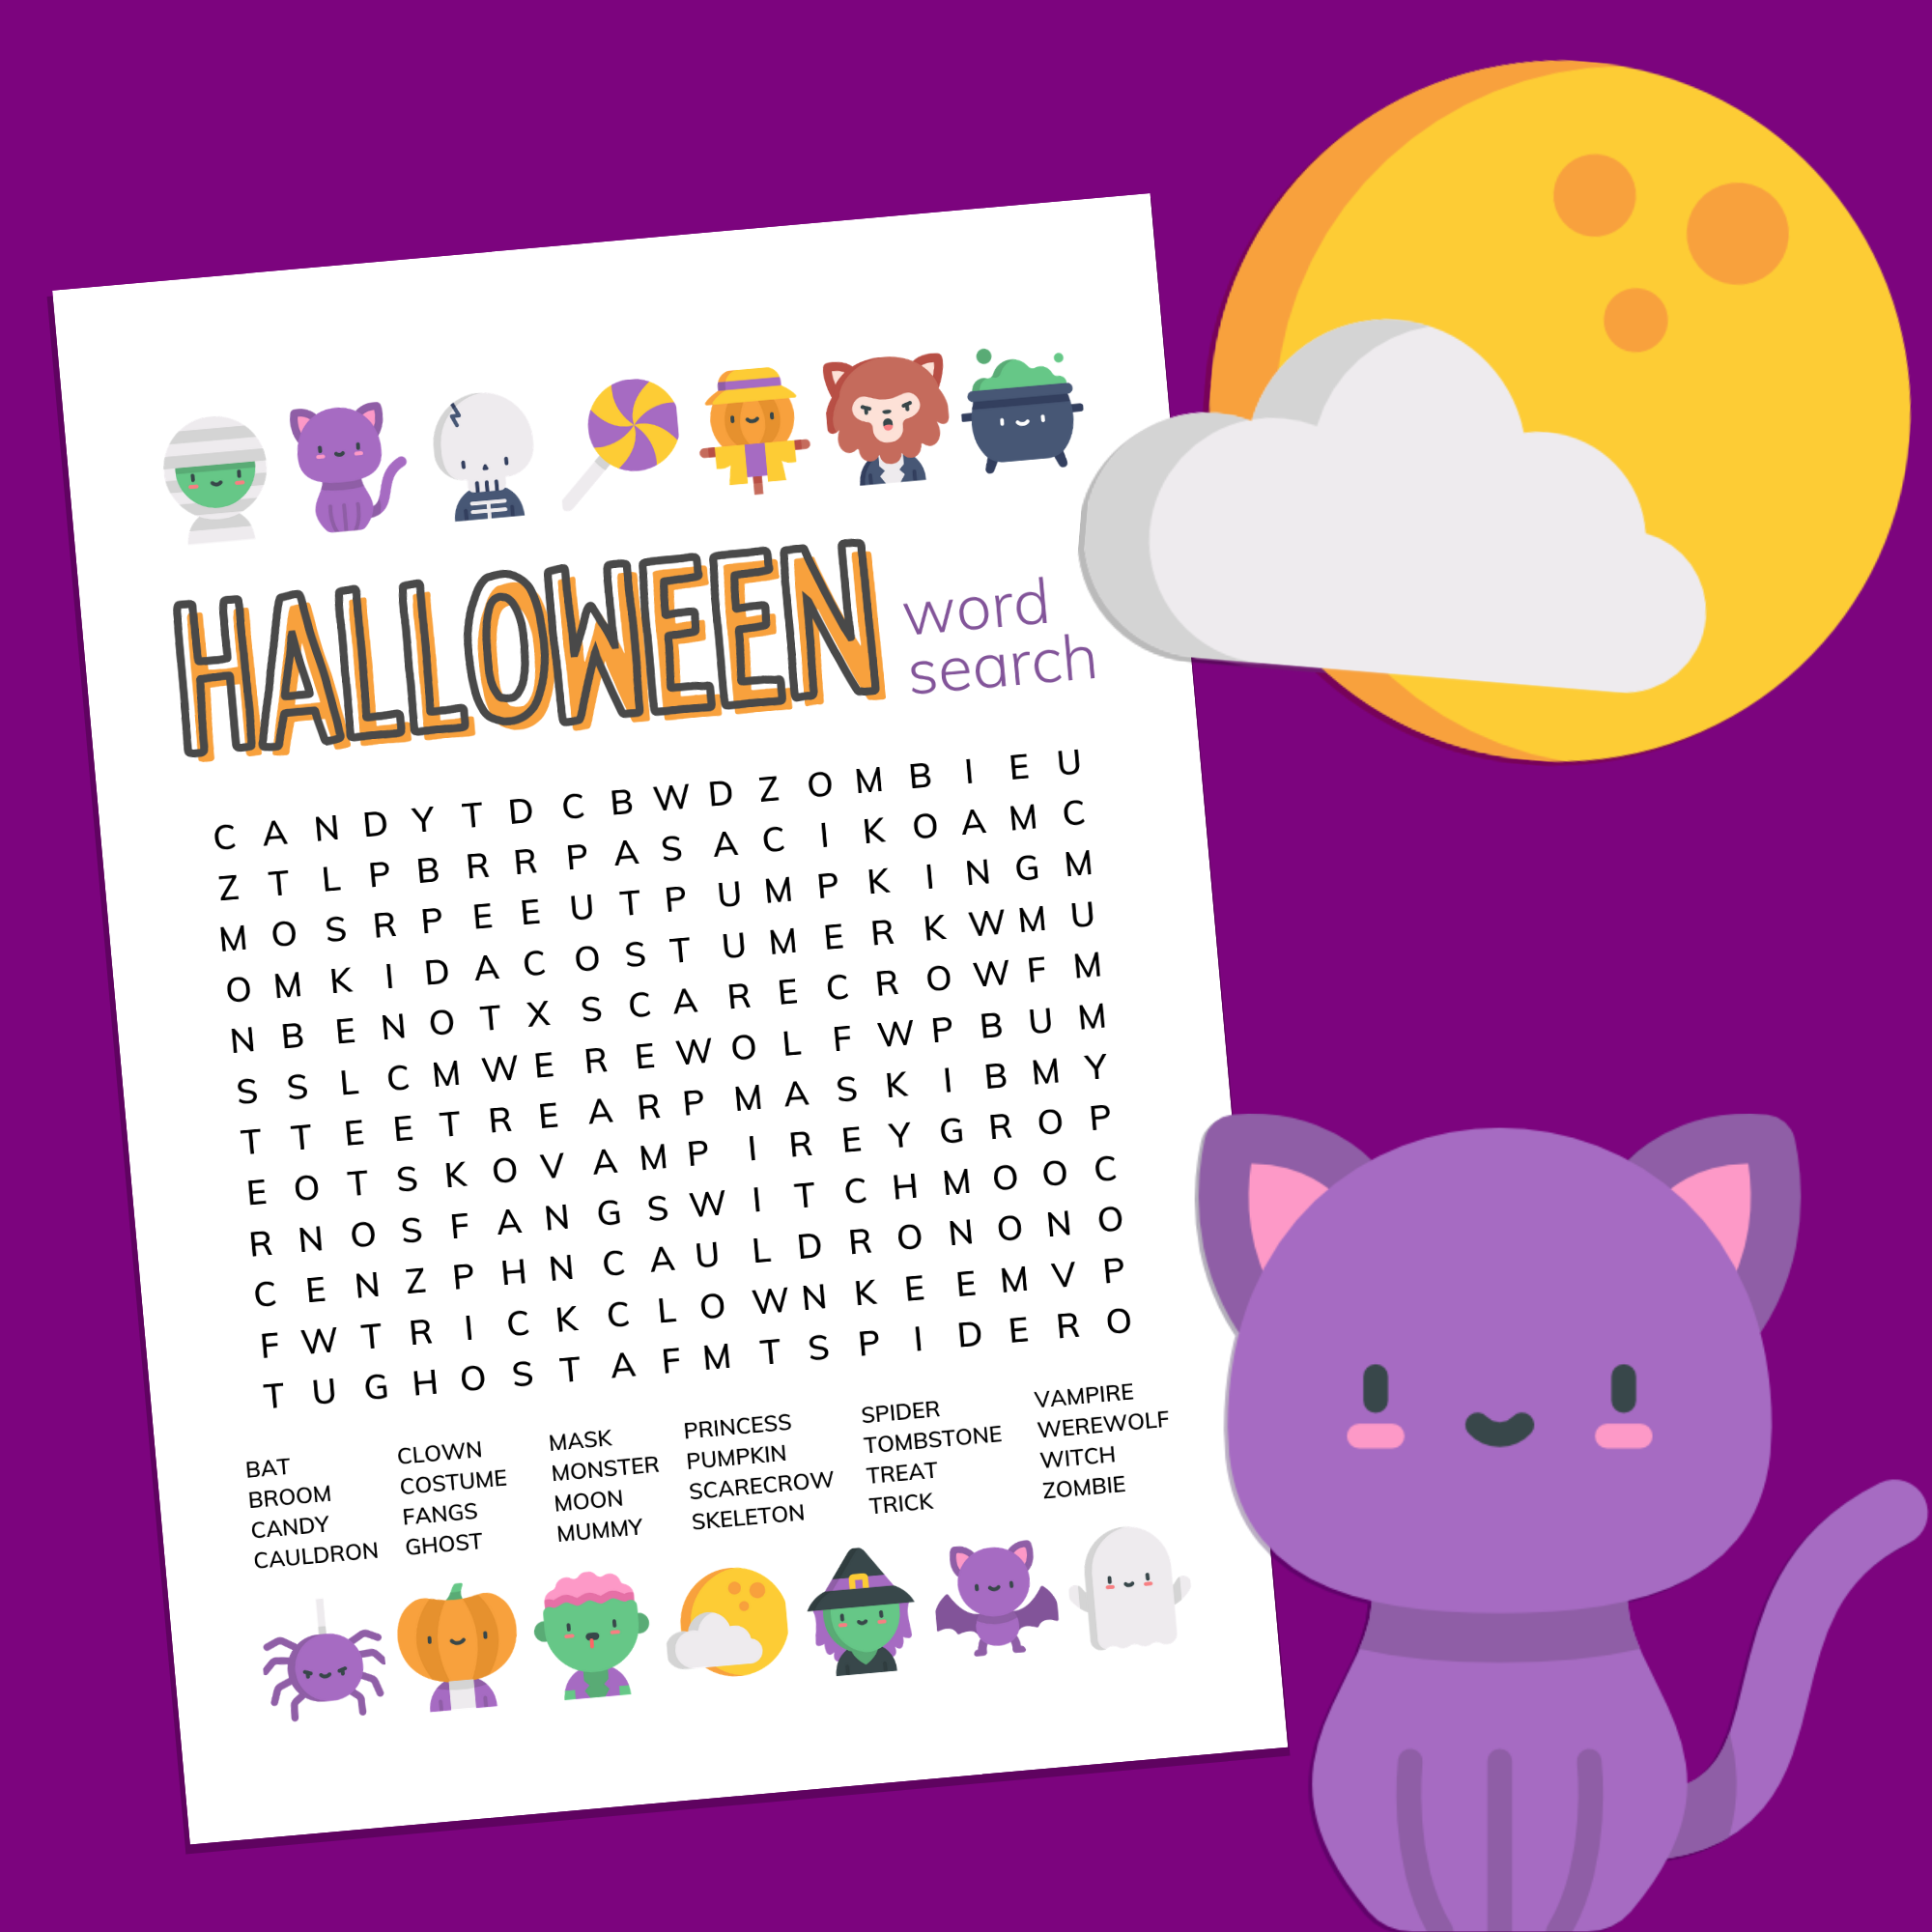 Halloween word search printable on a purple background with a cartoon spider